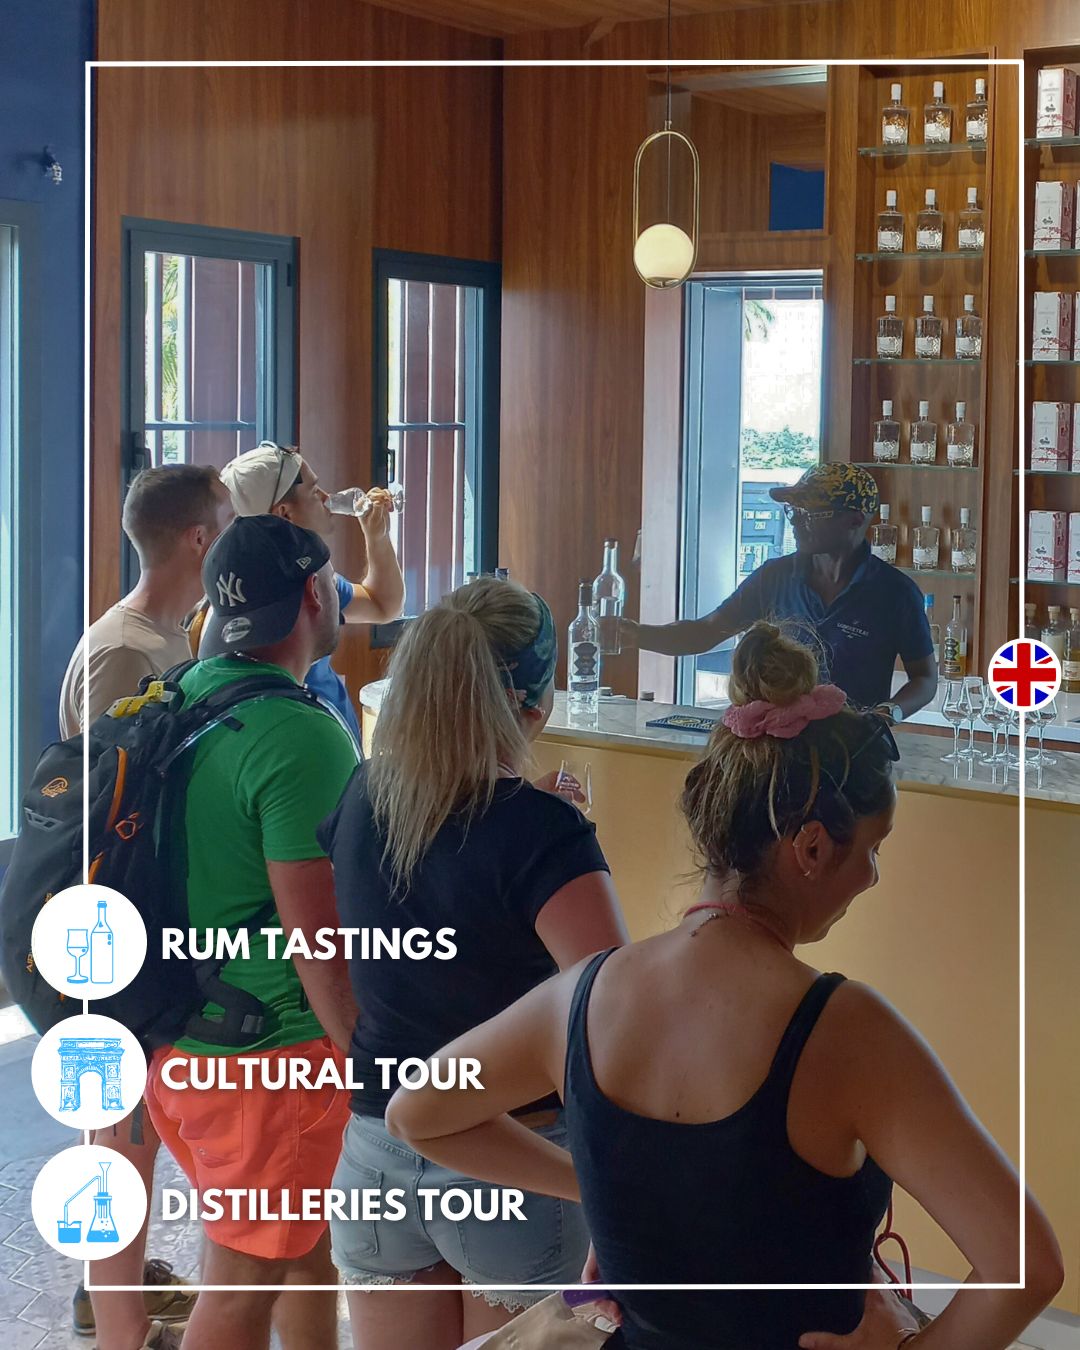 Guadeloupe Rhum tasting Tour, guadeloupe distillery tour, agricole rums tasting, rum tasting in guadeloupe, rum tasting tour in guadeloupe,